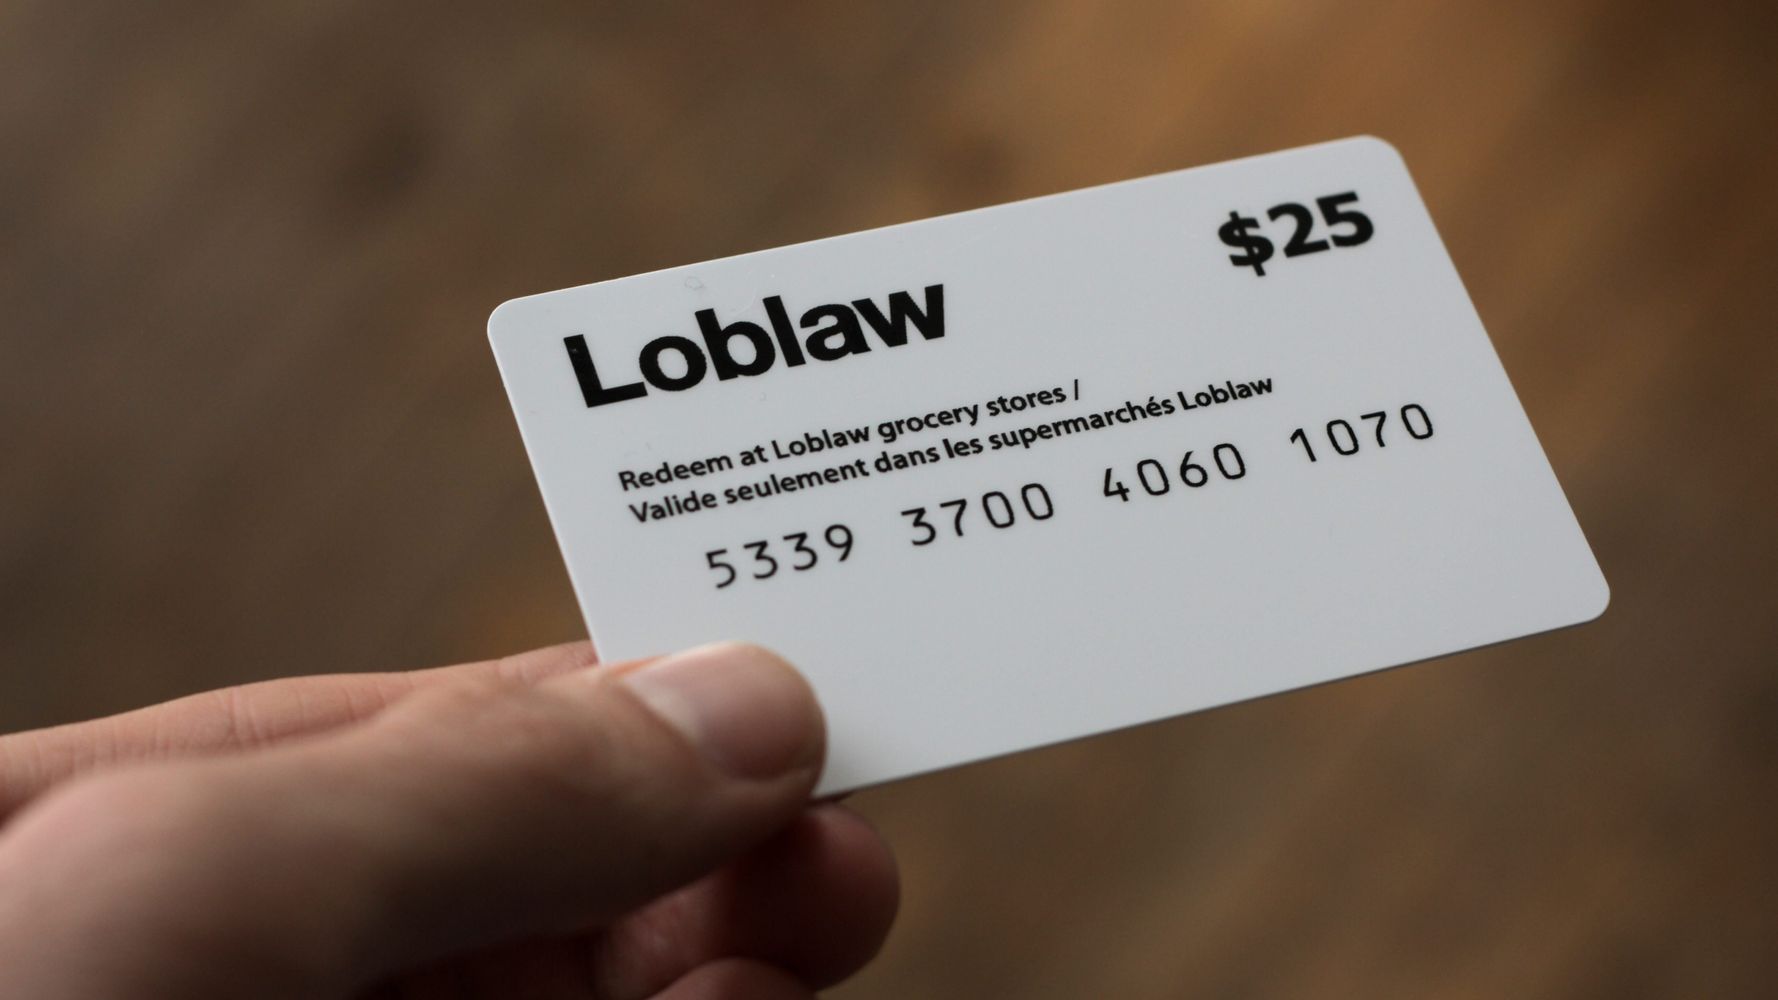 Why Is Loblaw Asking For ID To Get The 25 Gift Card